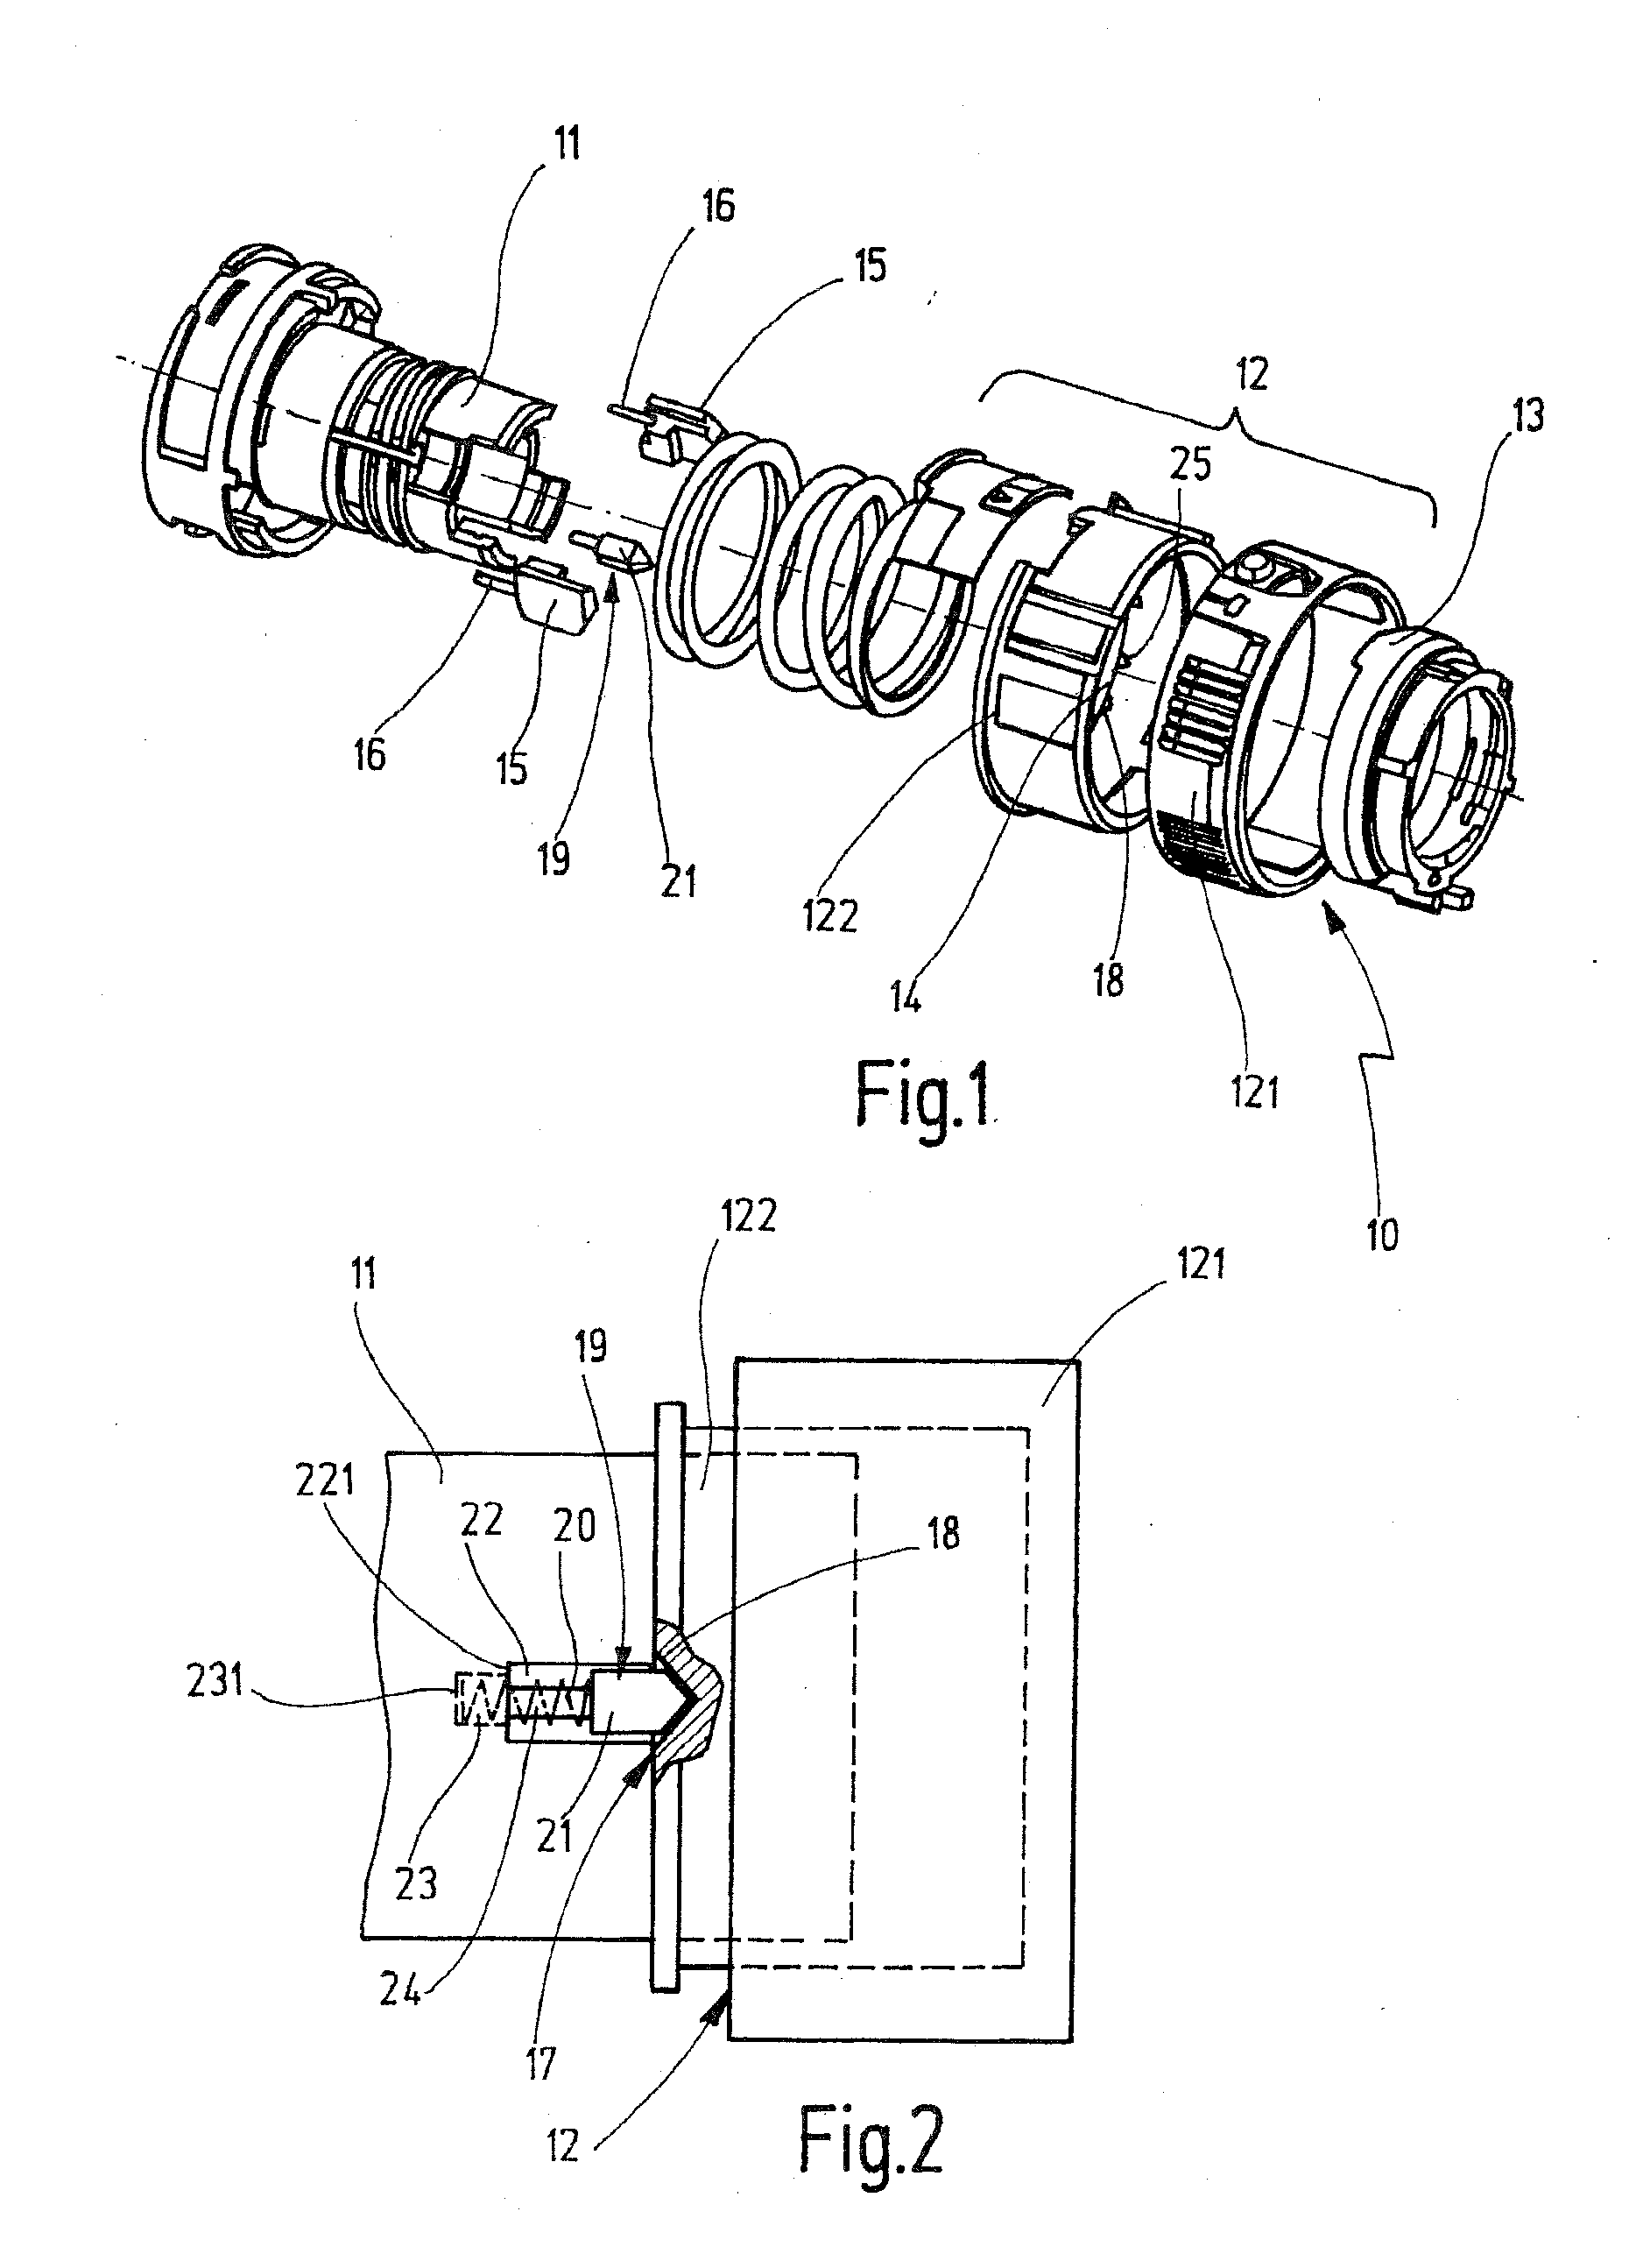 Operating mode switch for setting at least one operating mode in a hand-held power tool